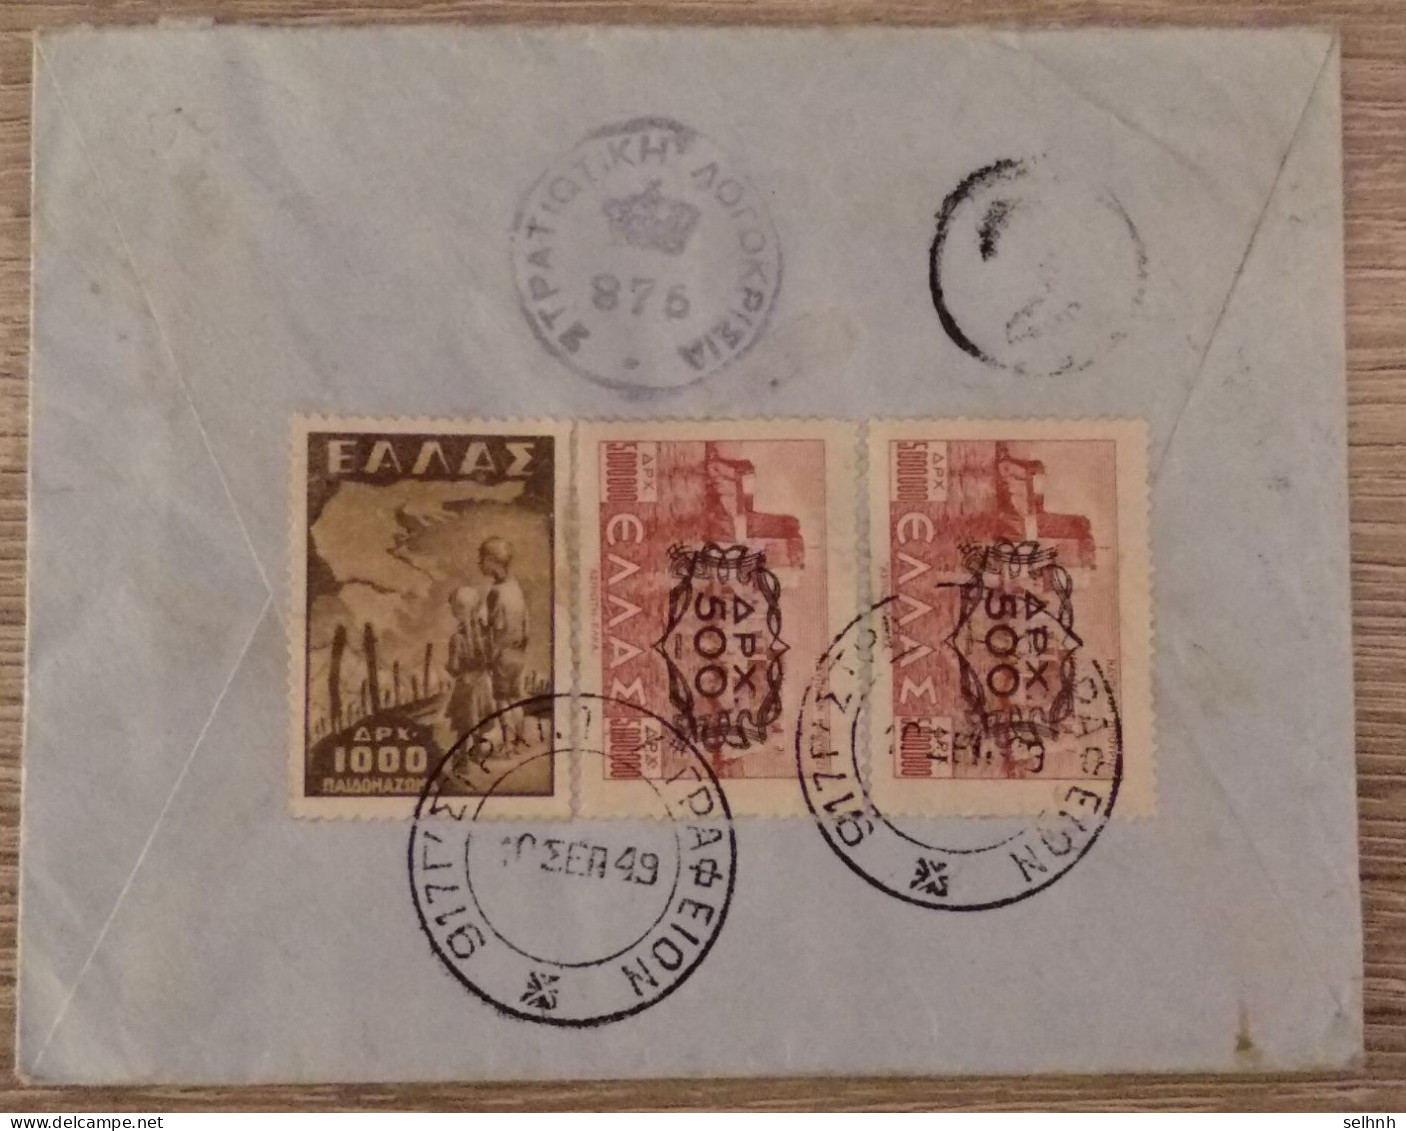 GREECE GRECE COVER TO FRANCE WITH ARMY GENSOR 876. THE STAMPS WERE CANCELED WITH "917 STRAT GRAFEION" - Brieven En Documenten